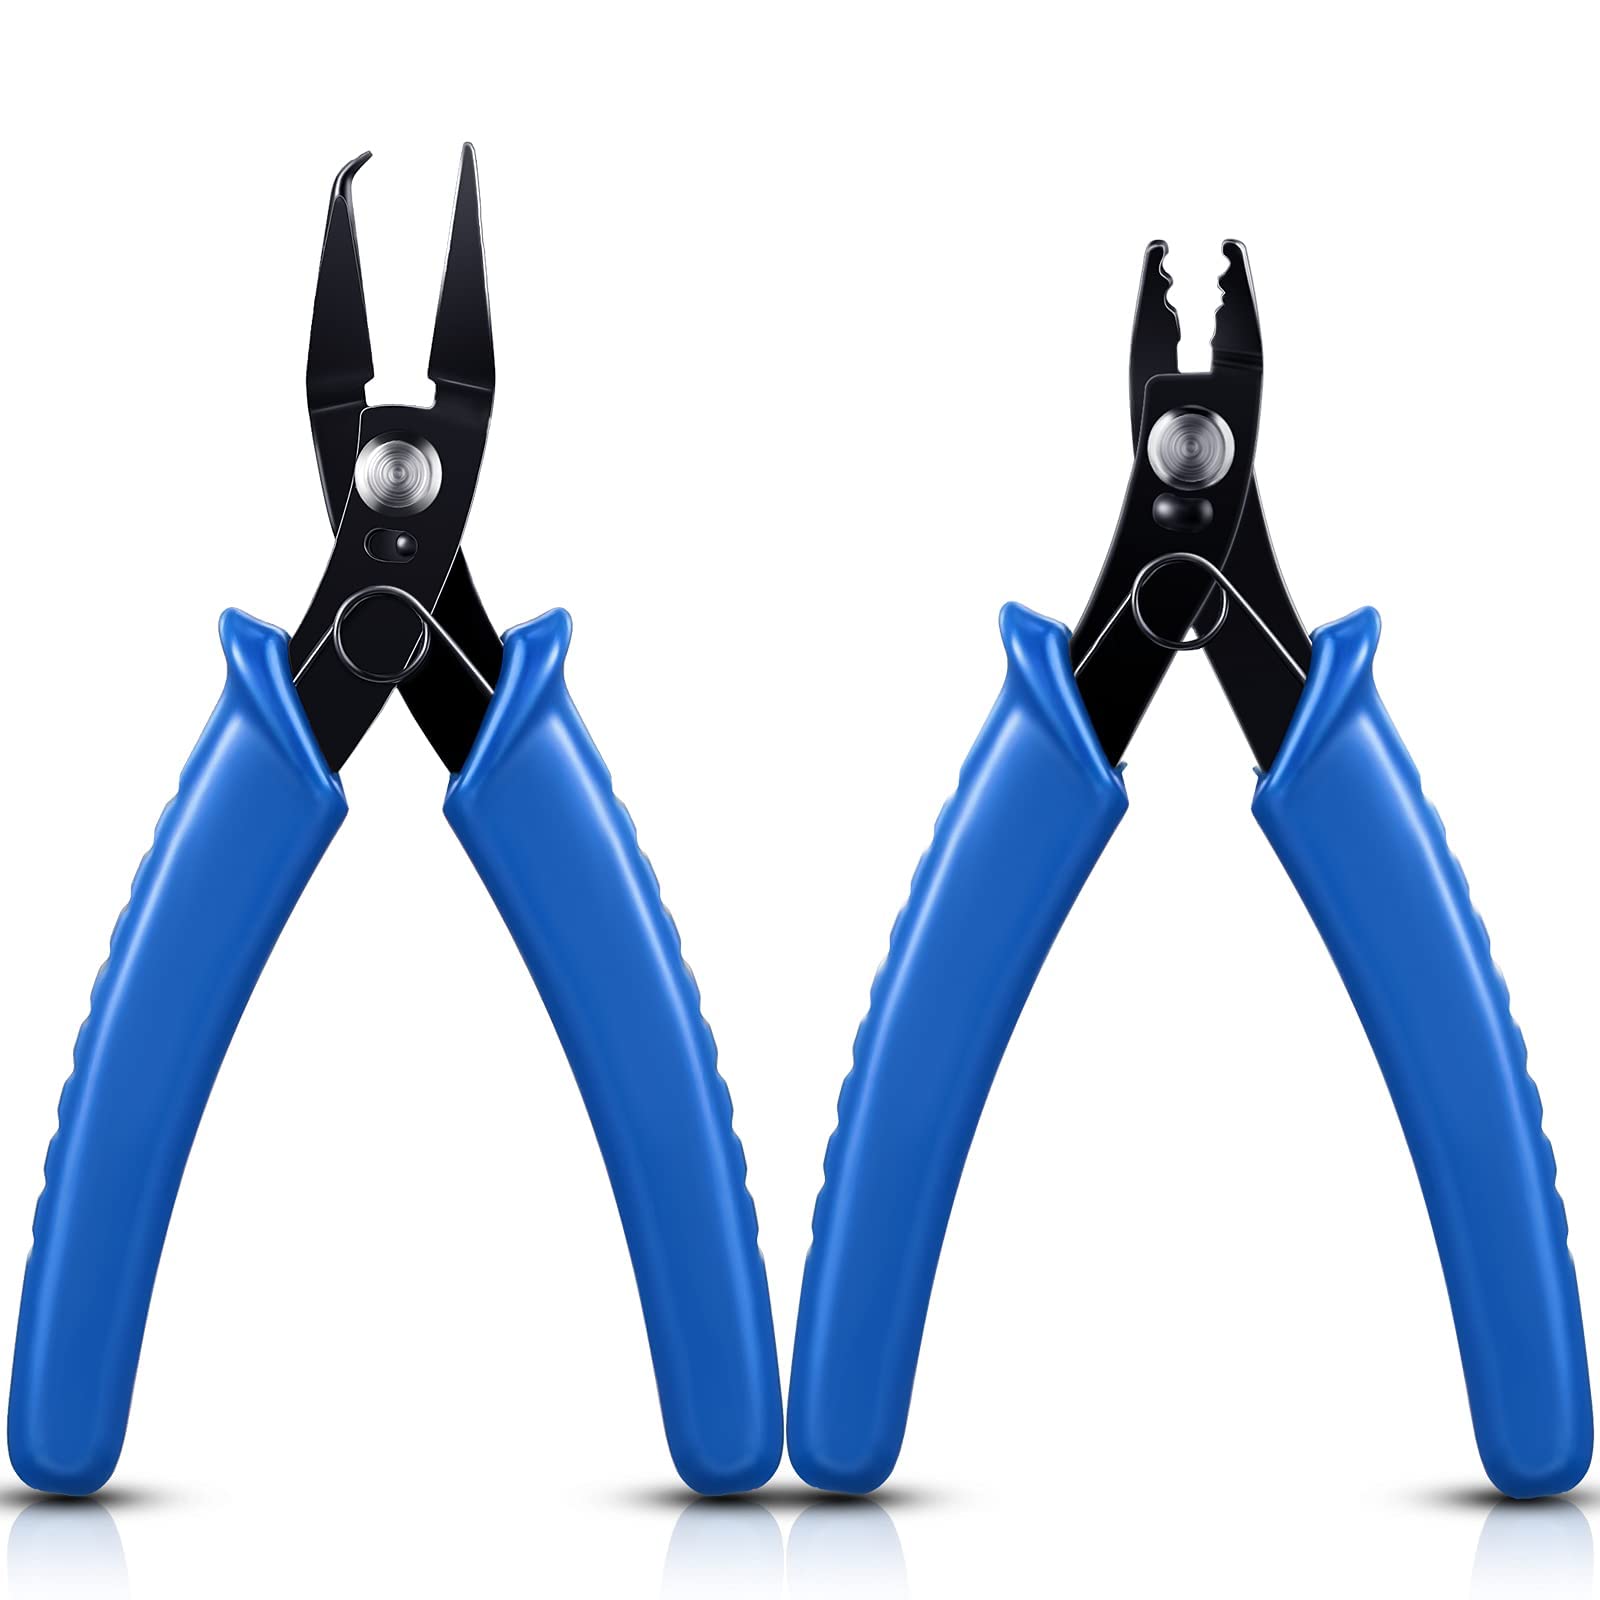 6 Mini Needle Nose Pliers with Comfort Grip Handles,2 Pliers Set for Handmade Craft